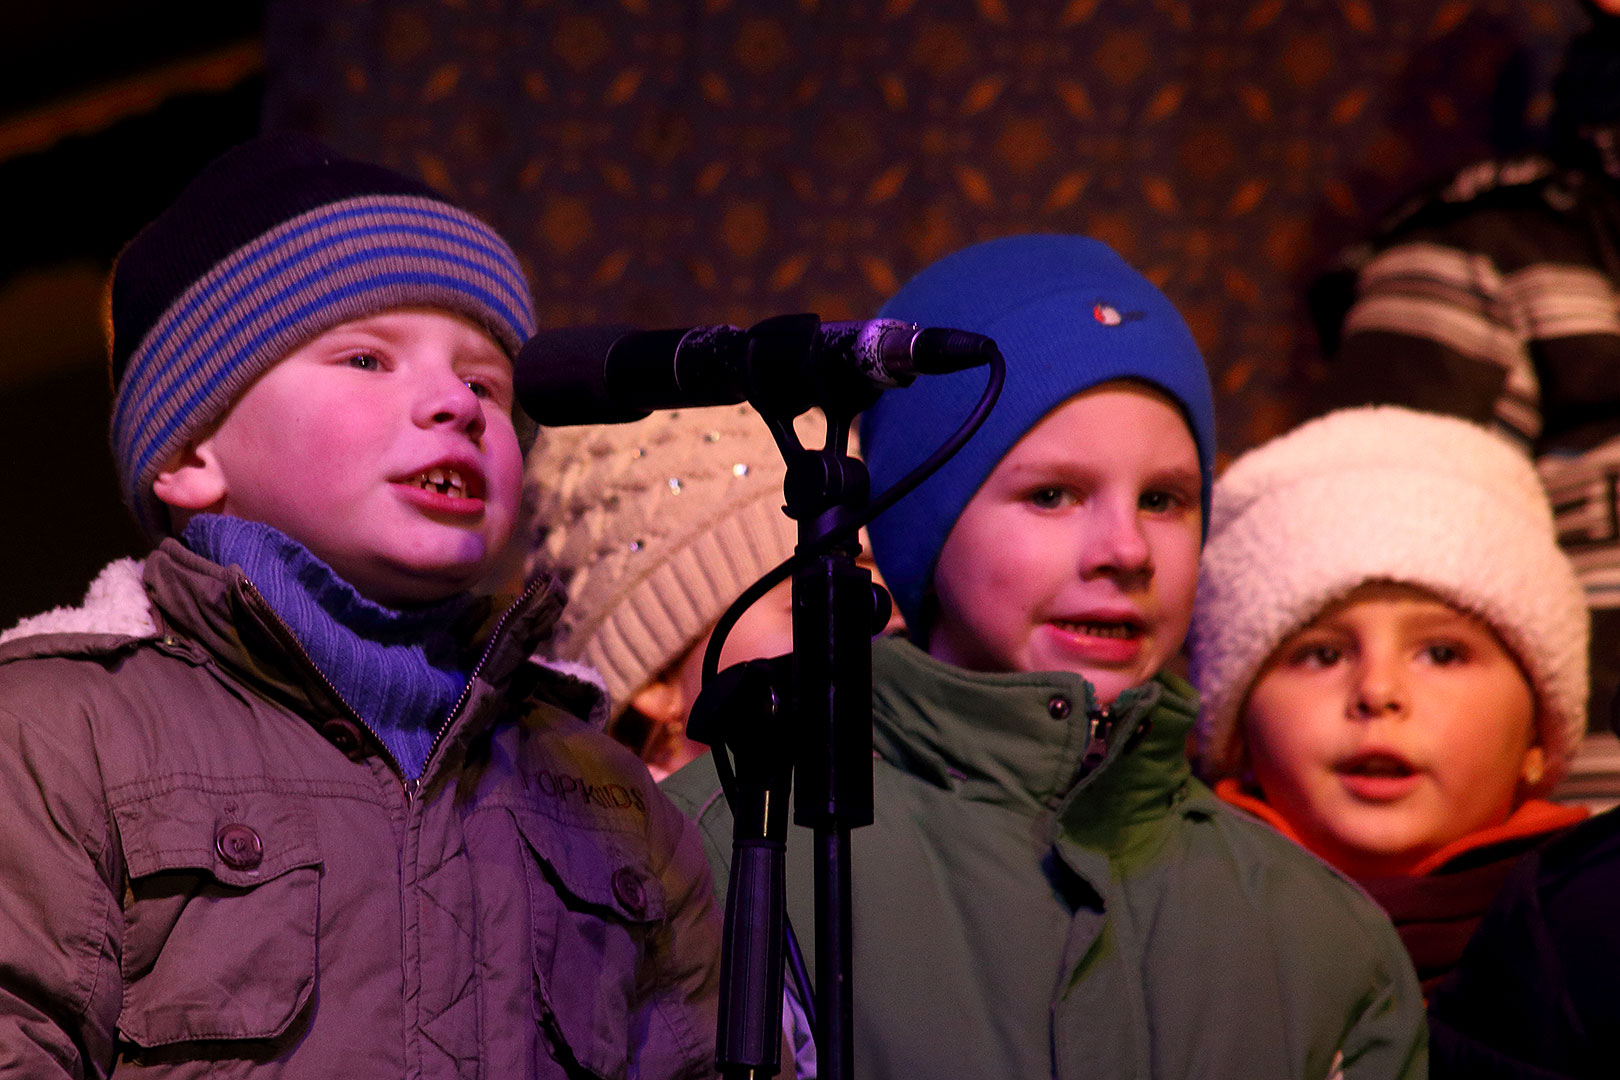 3rd Advent Sunday - Sing Along at the Christmas Tree, 15.12.2013